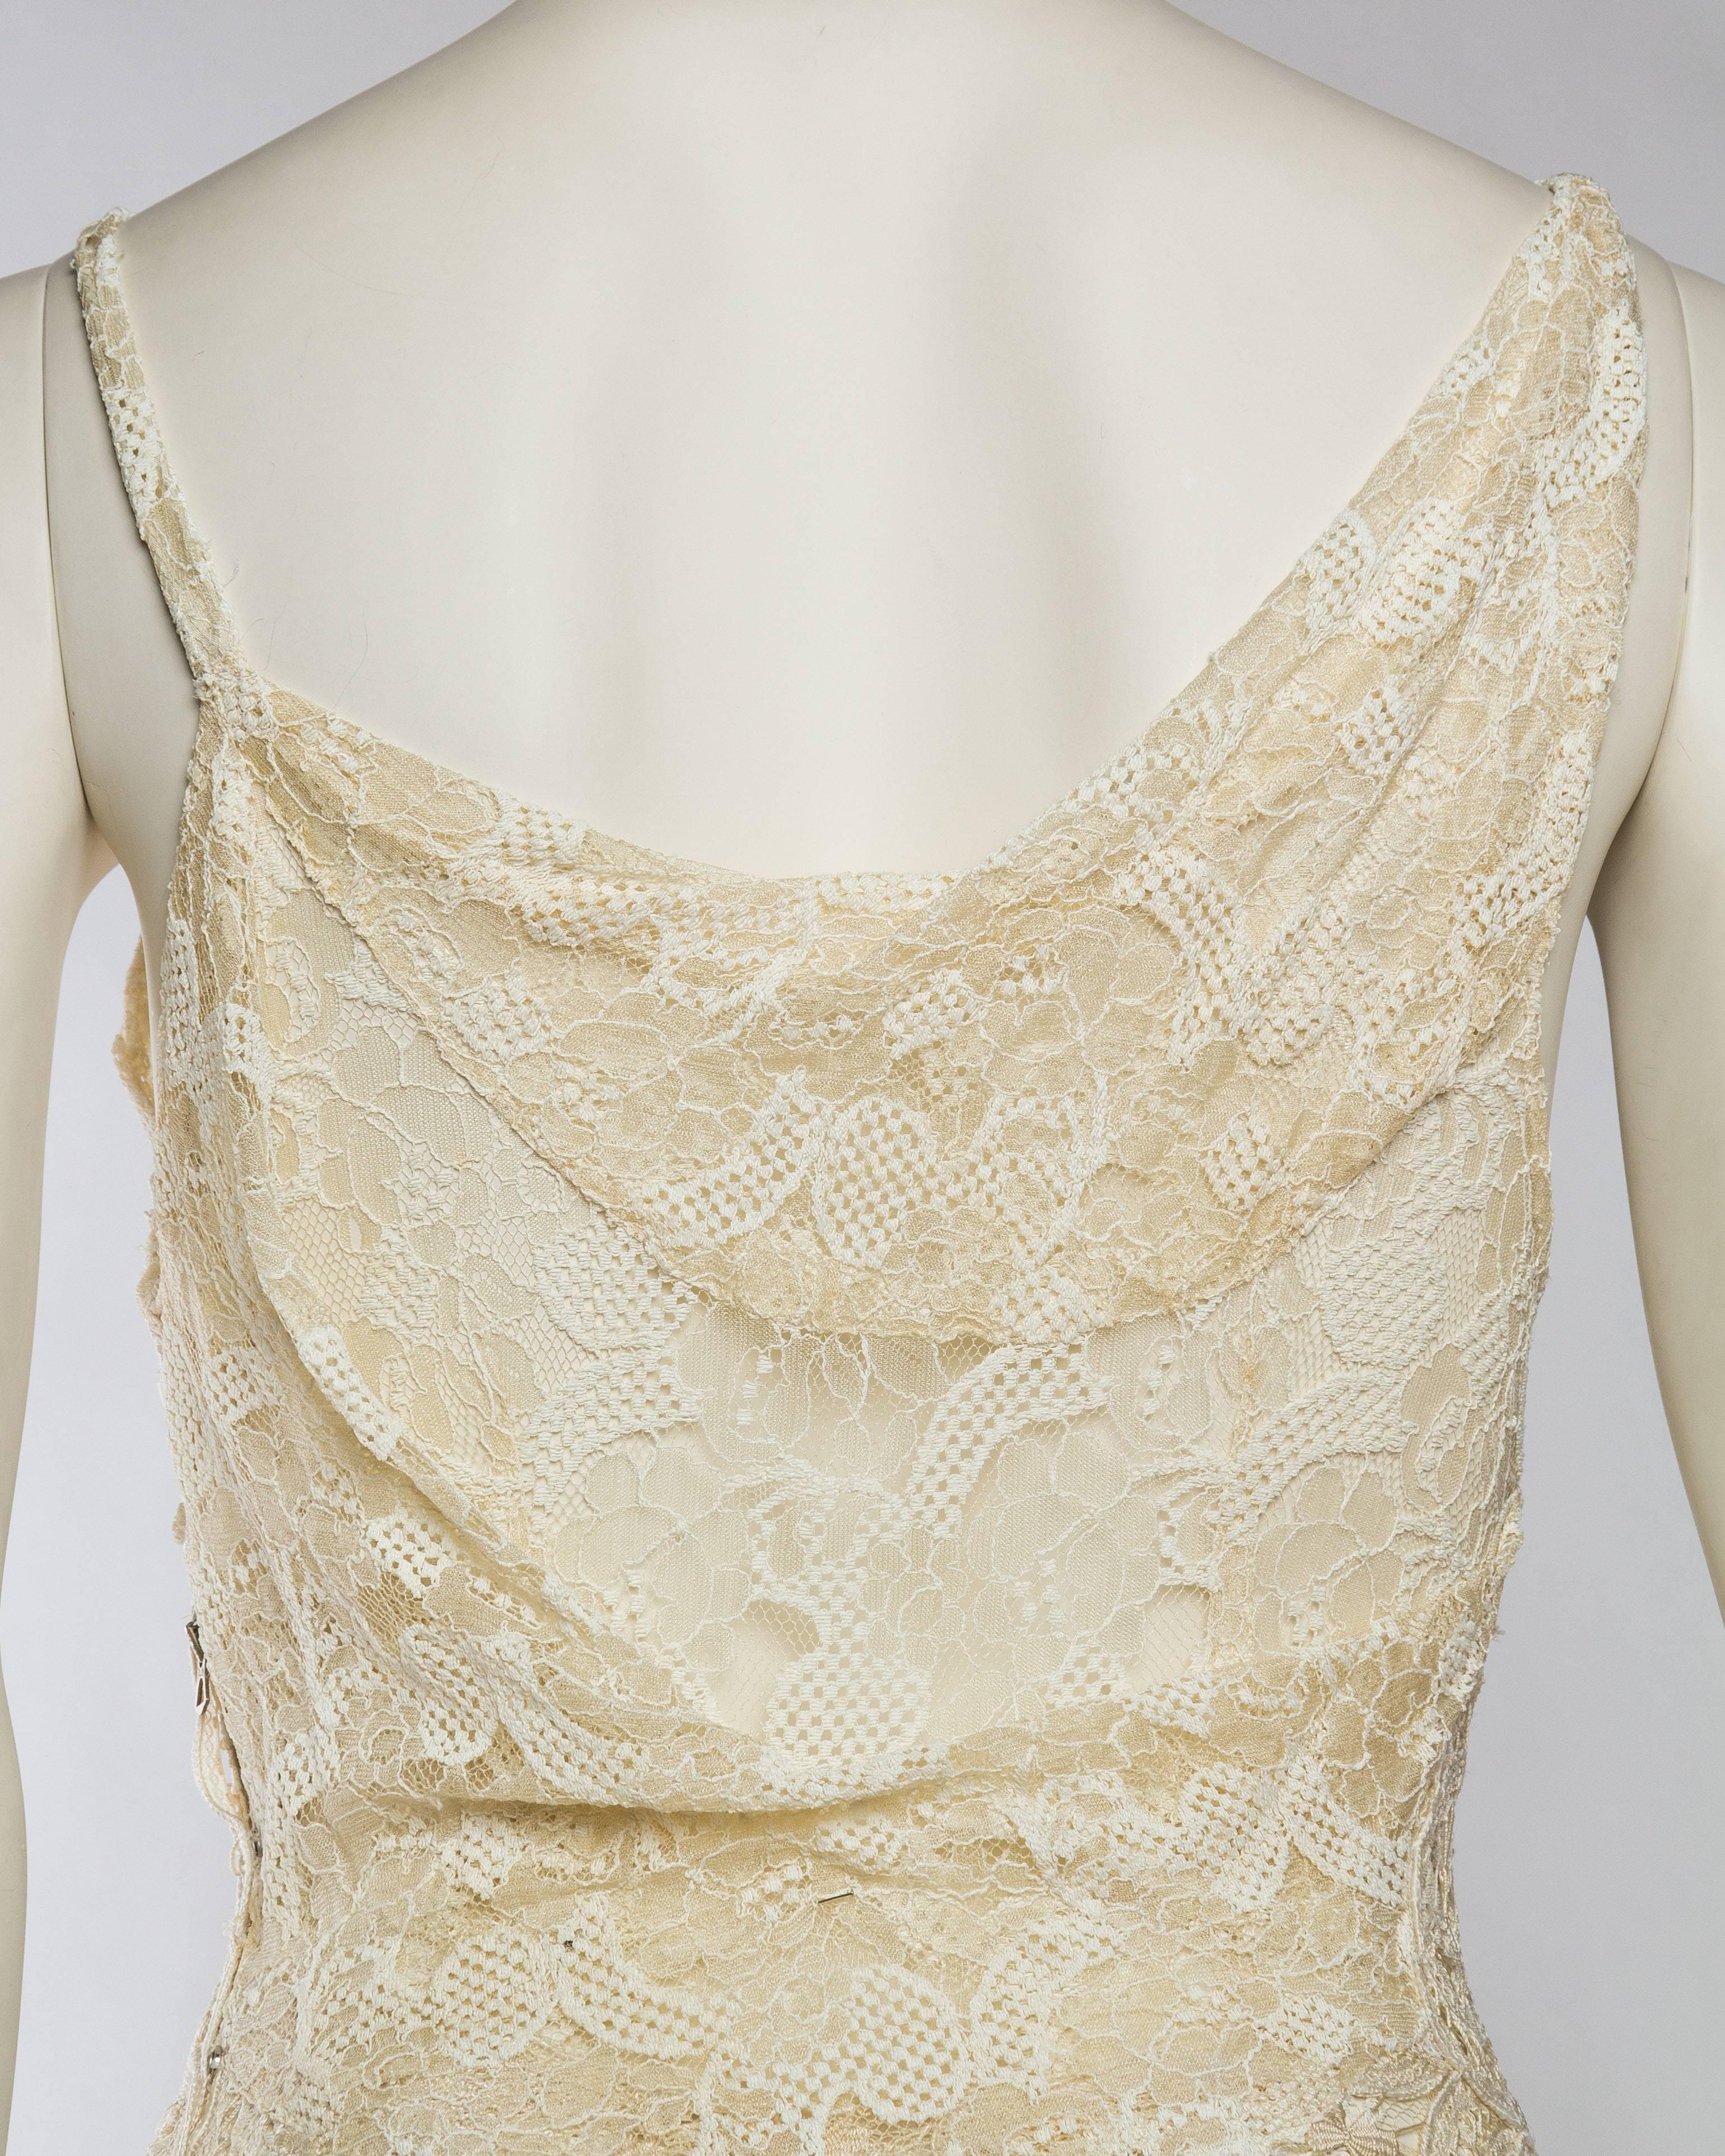 Women's 1930s Sheer Silk Lace Gown with Victorian Lace Fringe